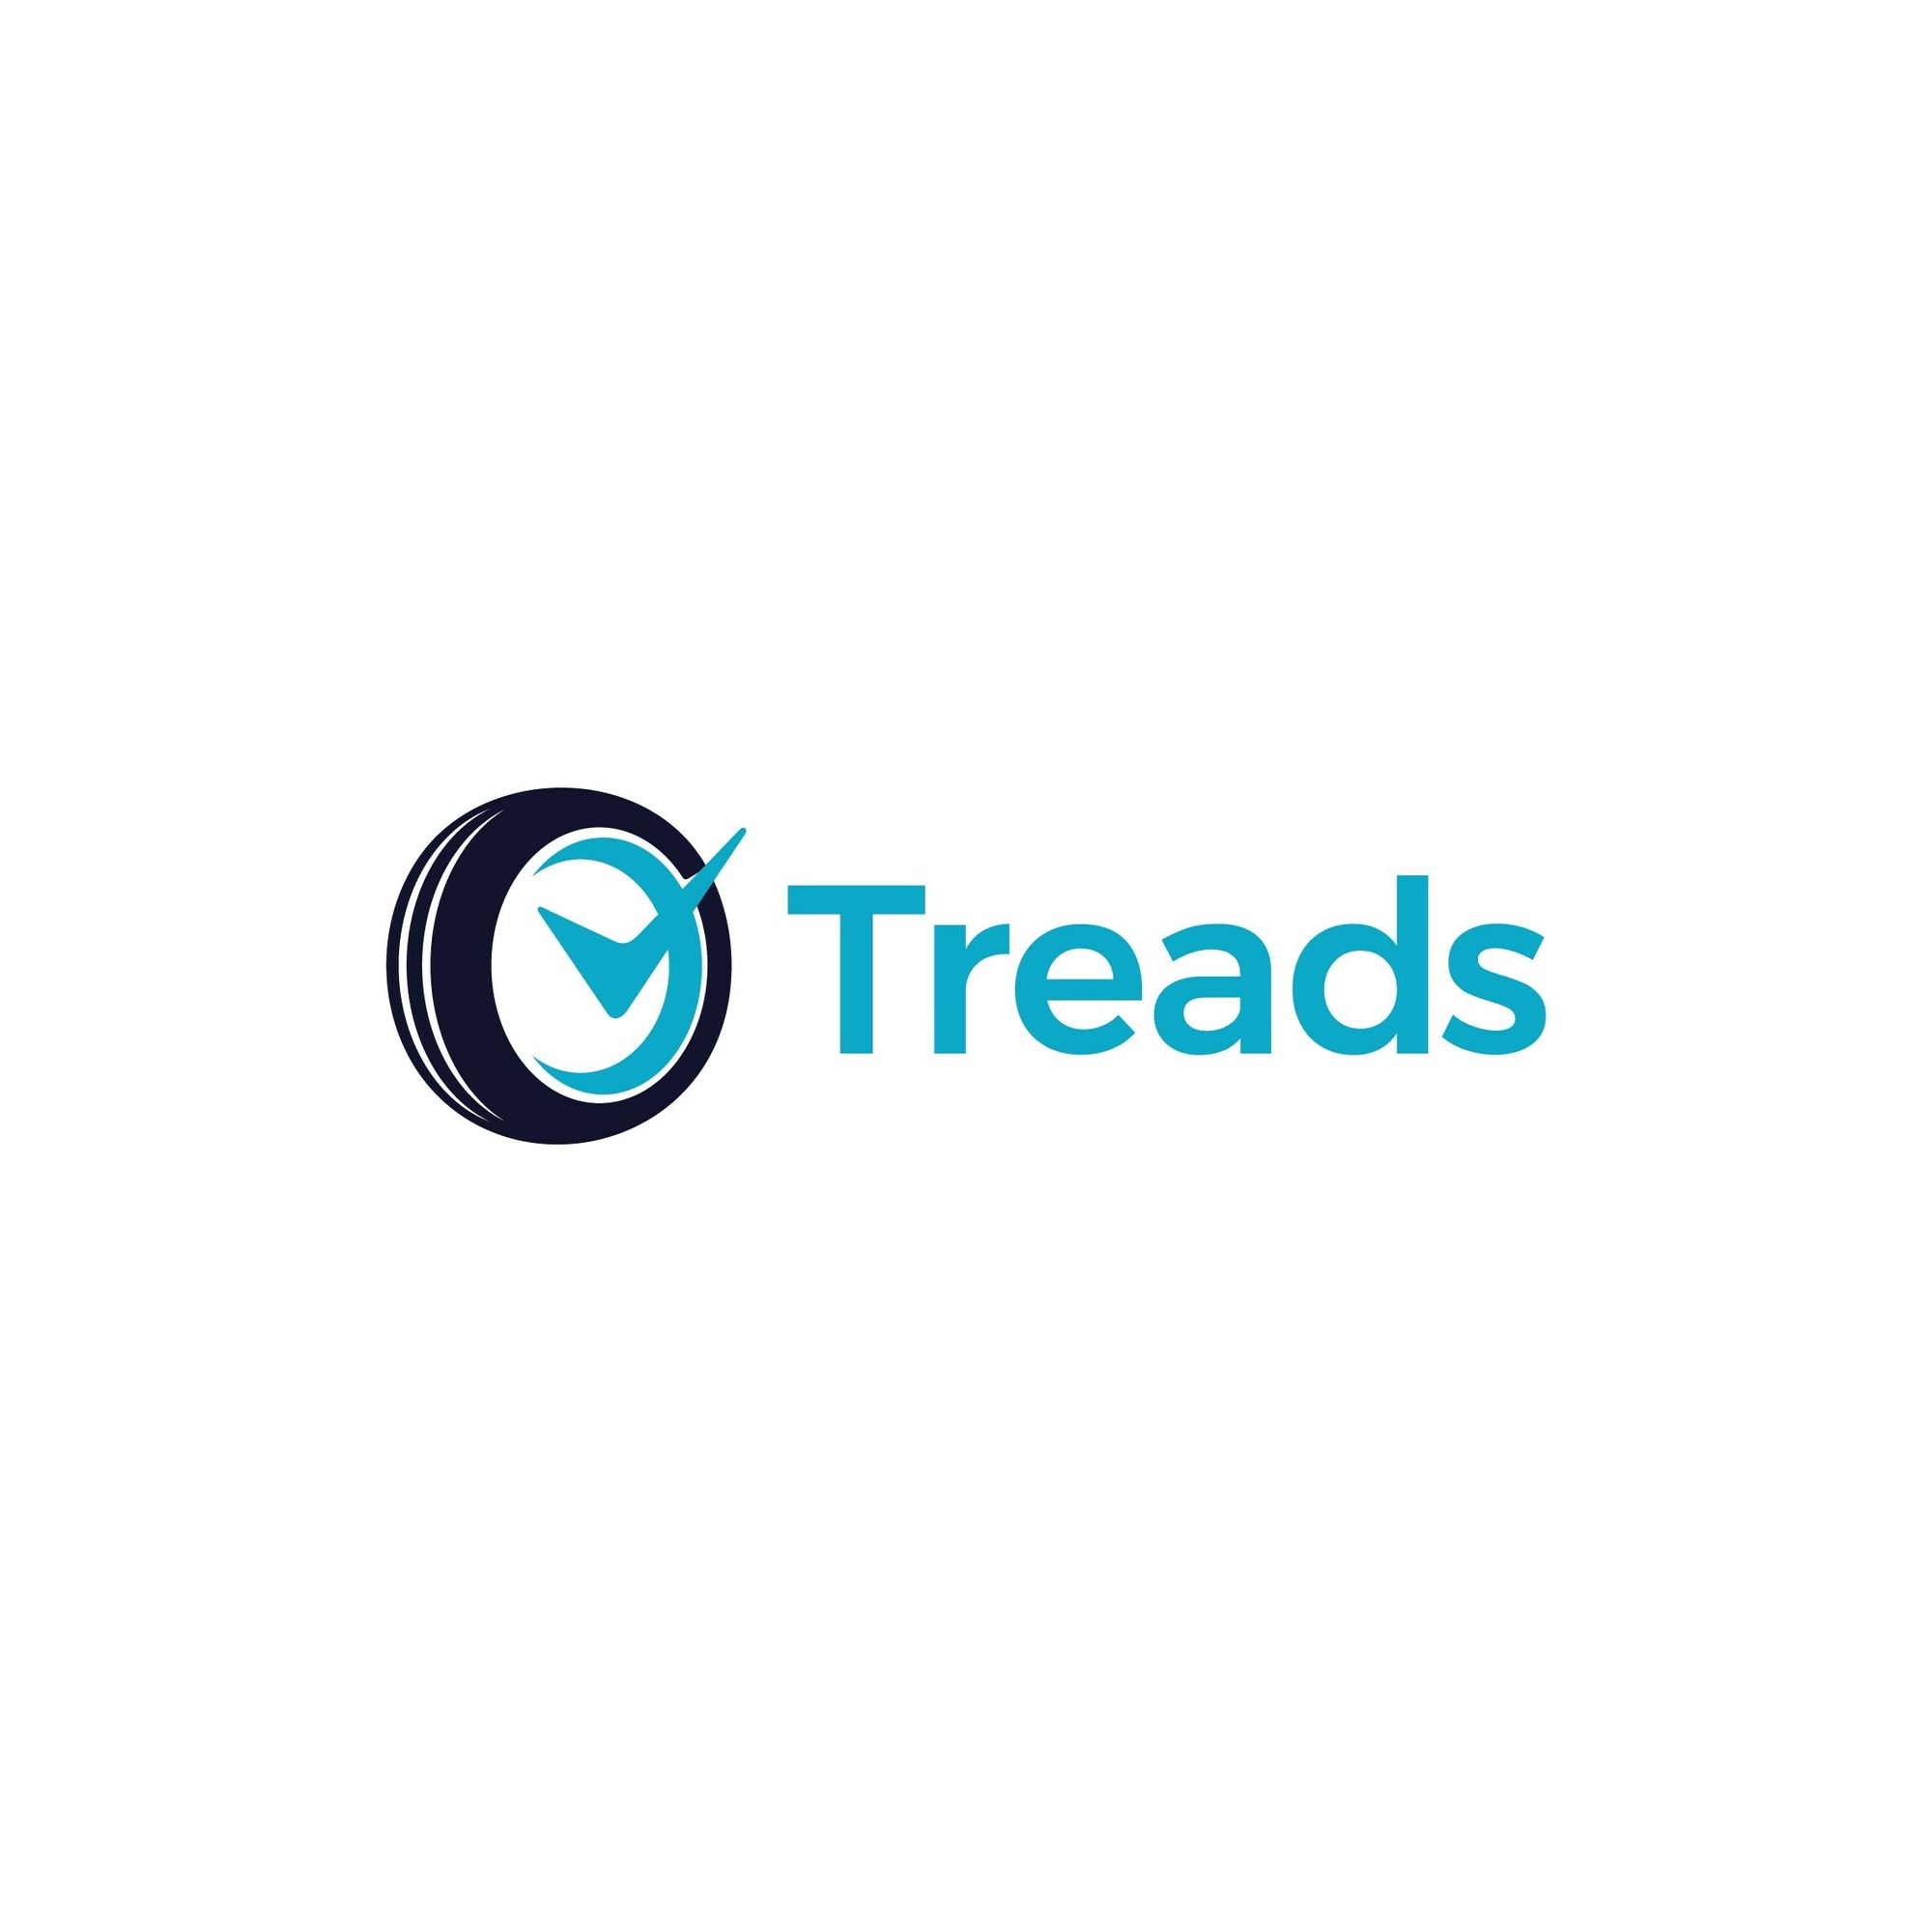 Treads Secures $4.6 Million Investment Boost